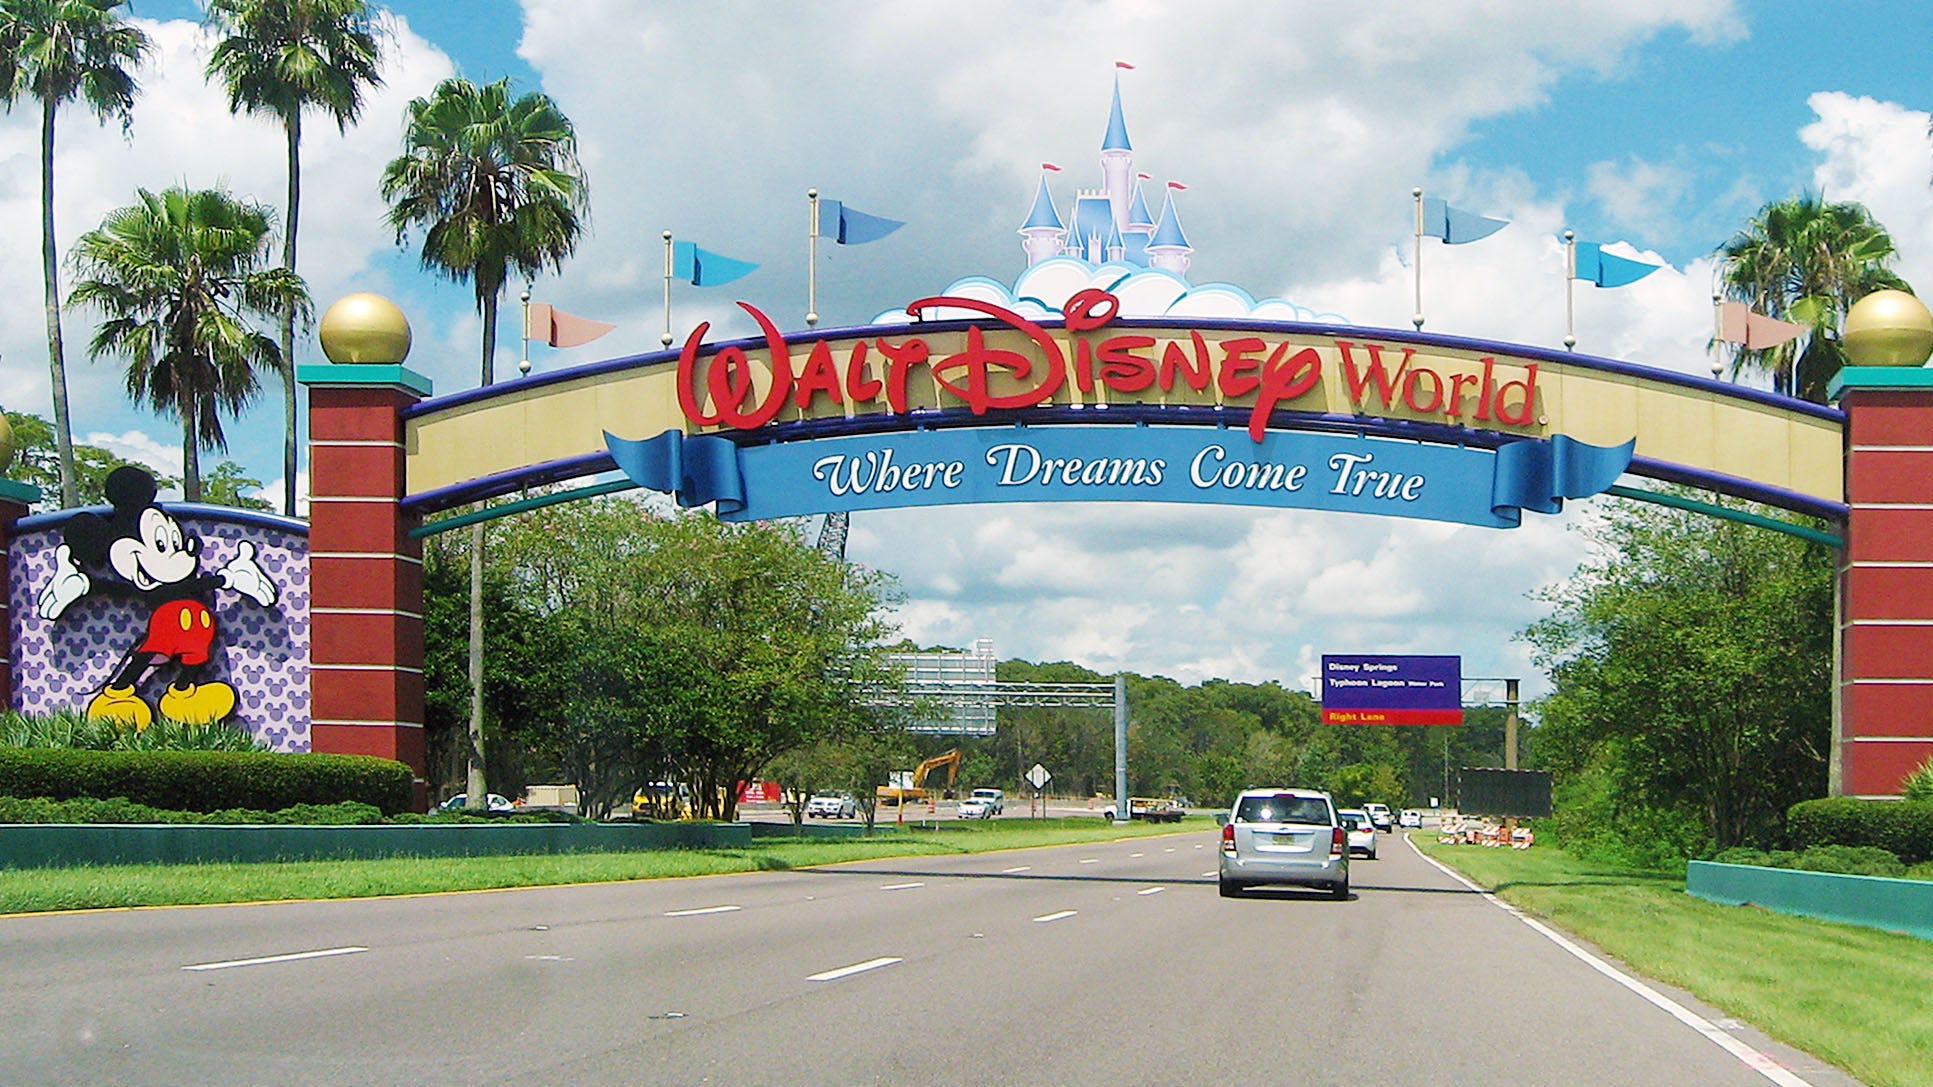 Disney World is hiring in preparation for capacity increase: report